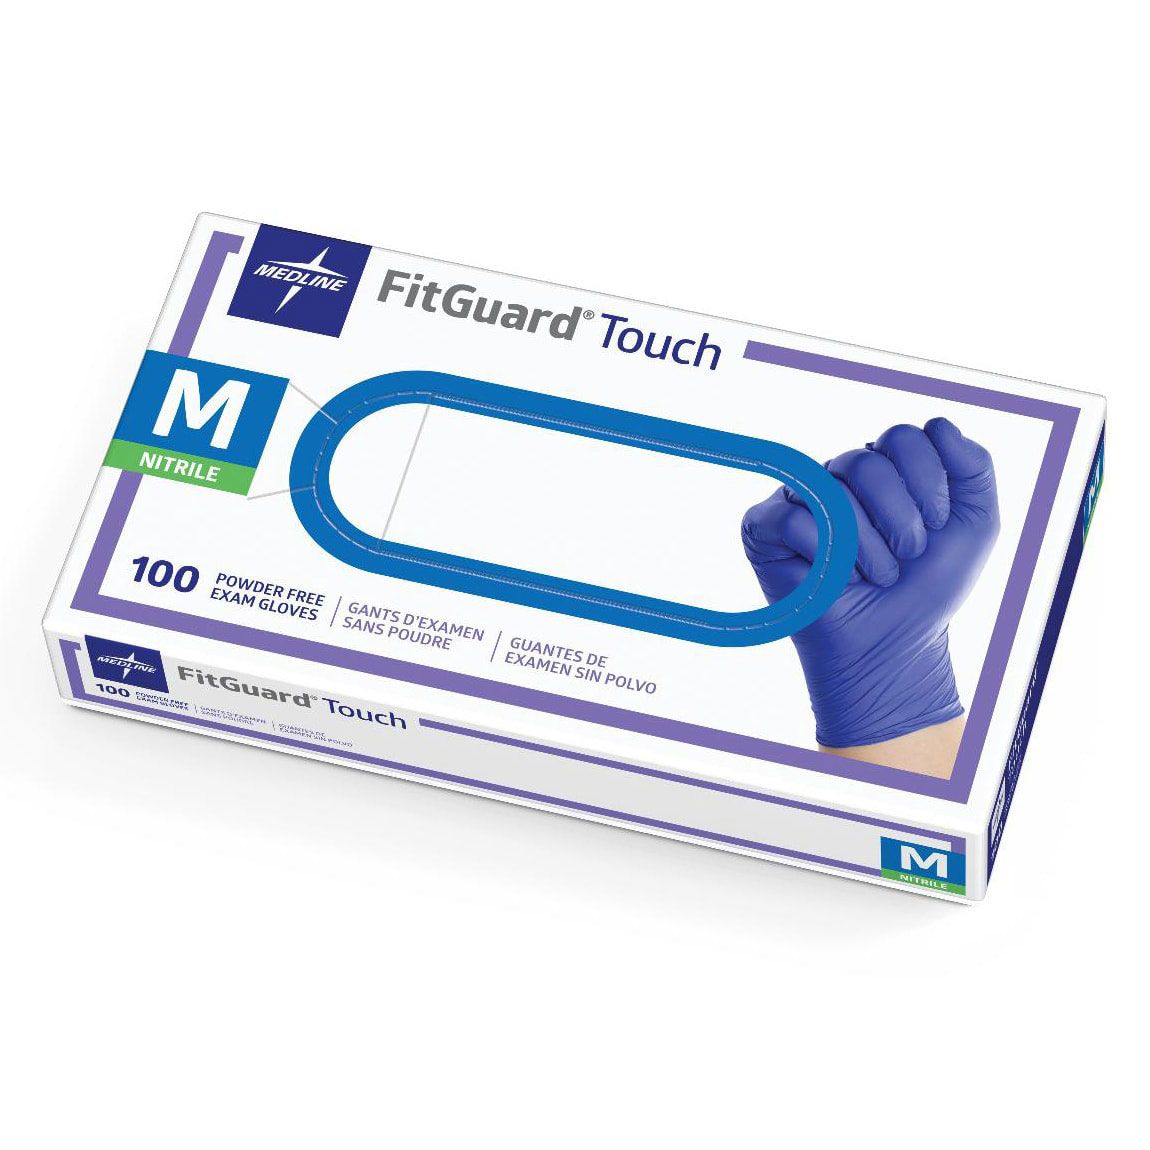 FitGuard Touch Nitrile Exam Gloves